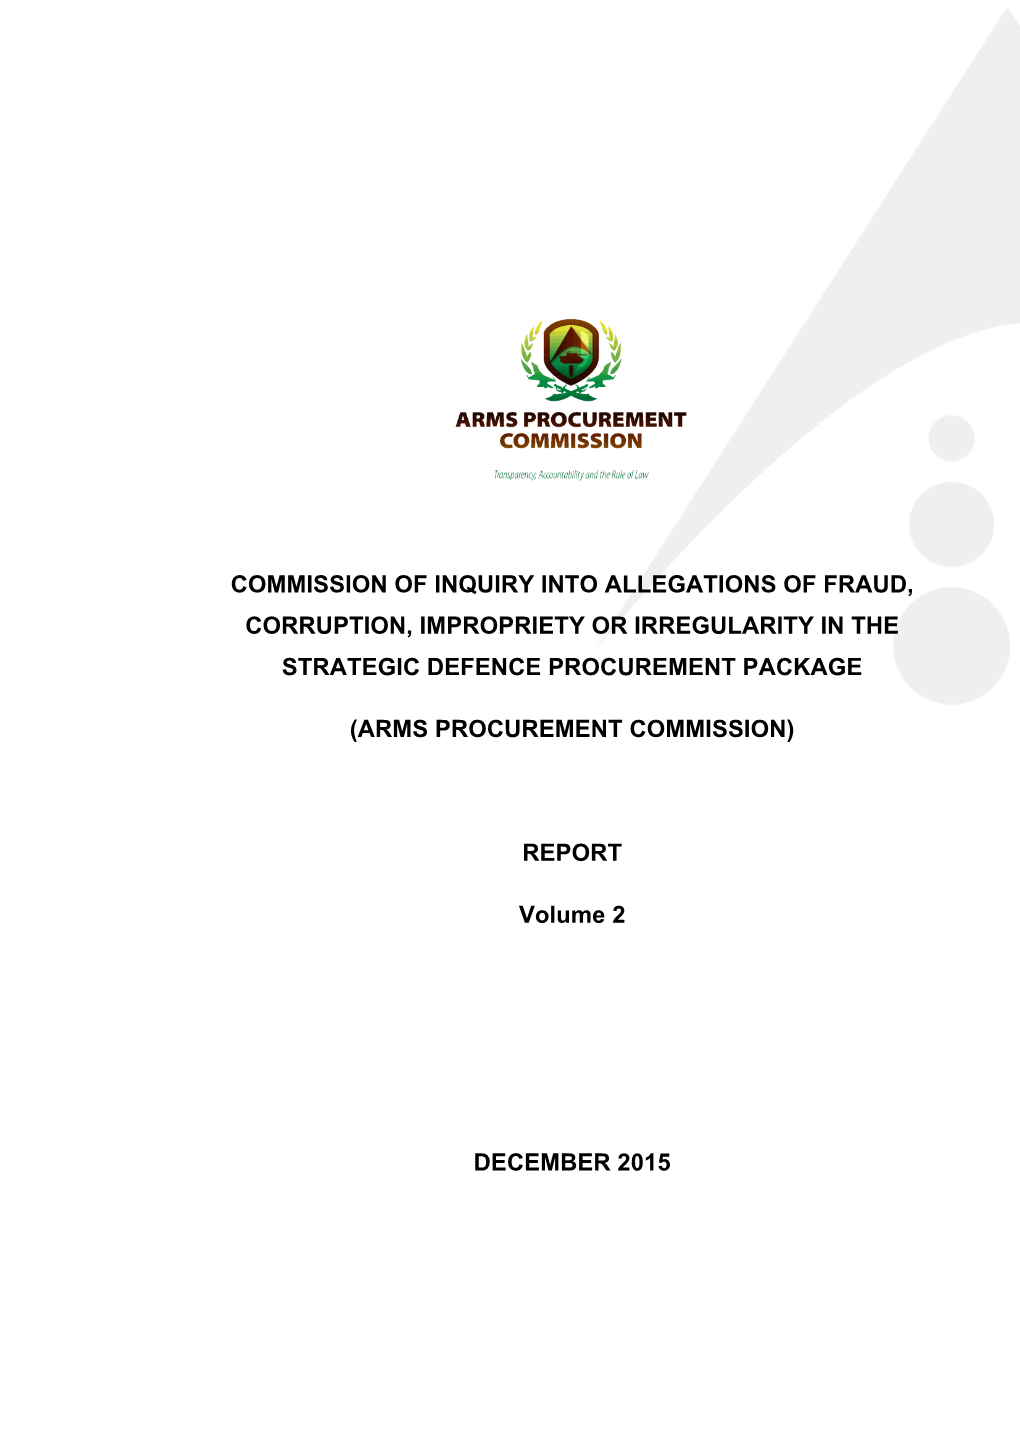 Commission of Inquiry Into Allegations of Fraud, Corruption, Impropriety Or Irregularity in the Strategic Defence Procurement Package